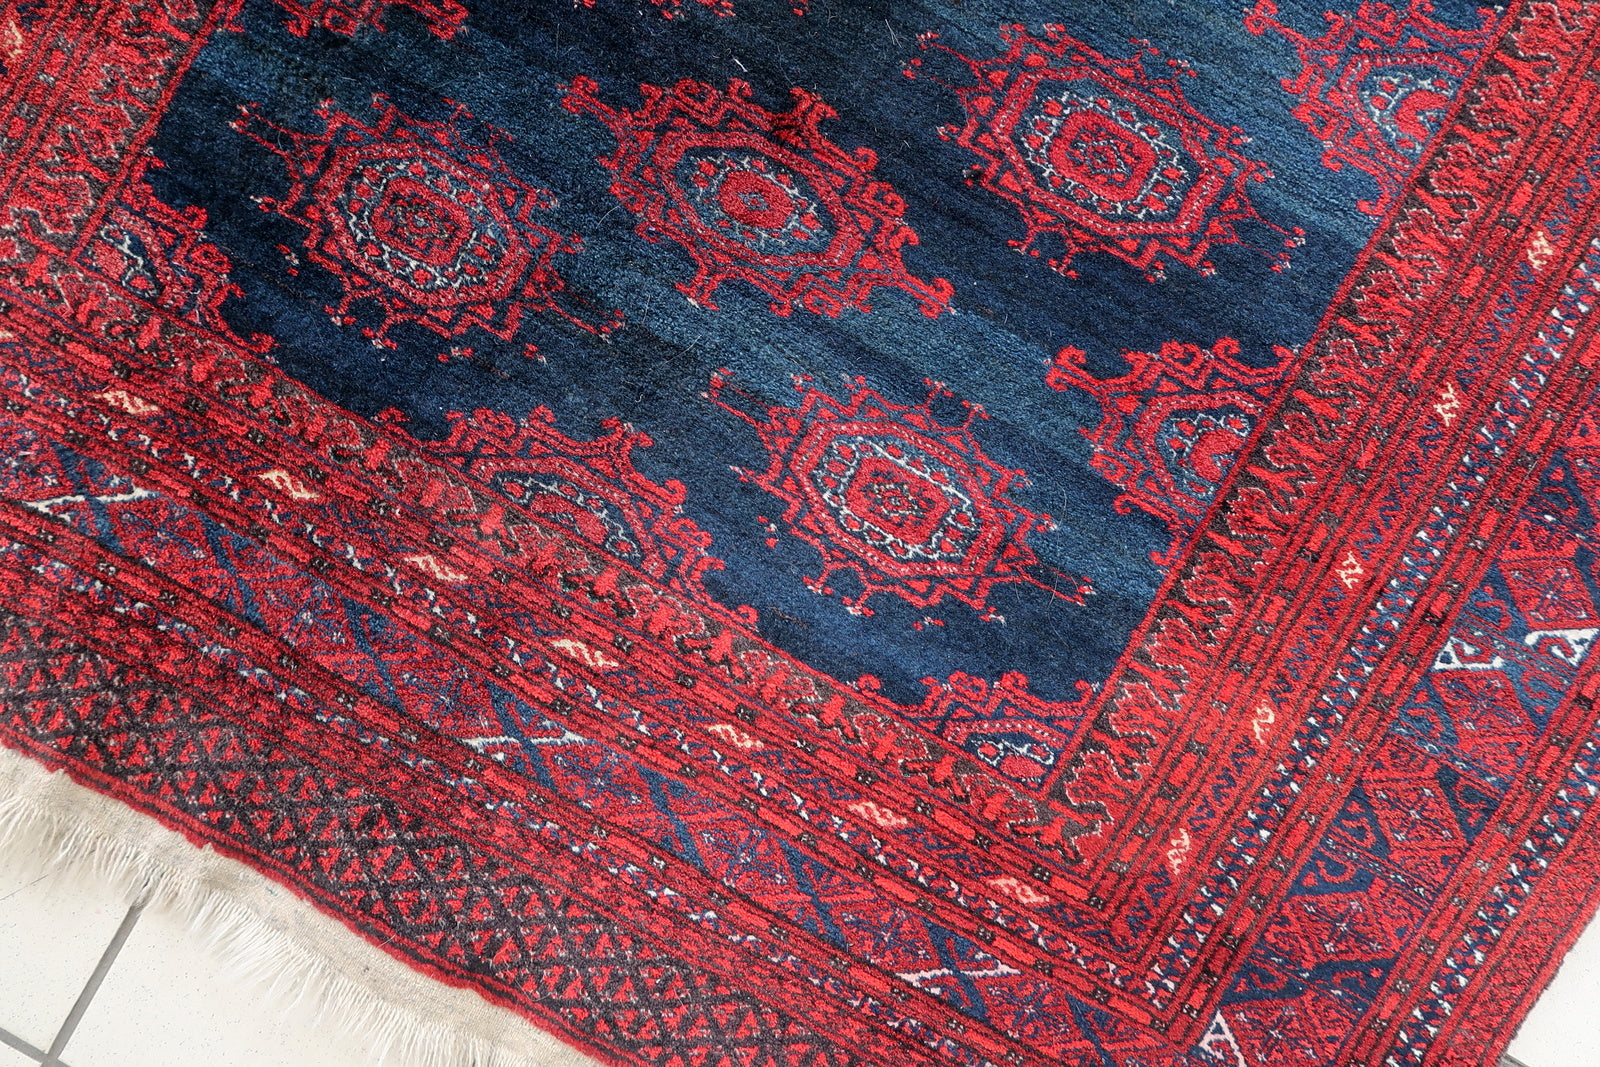 Handmade vintage Afghan Baluch rug in bright red and dark blue shades. The rug is from the middle of 20th century in original good condition.